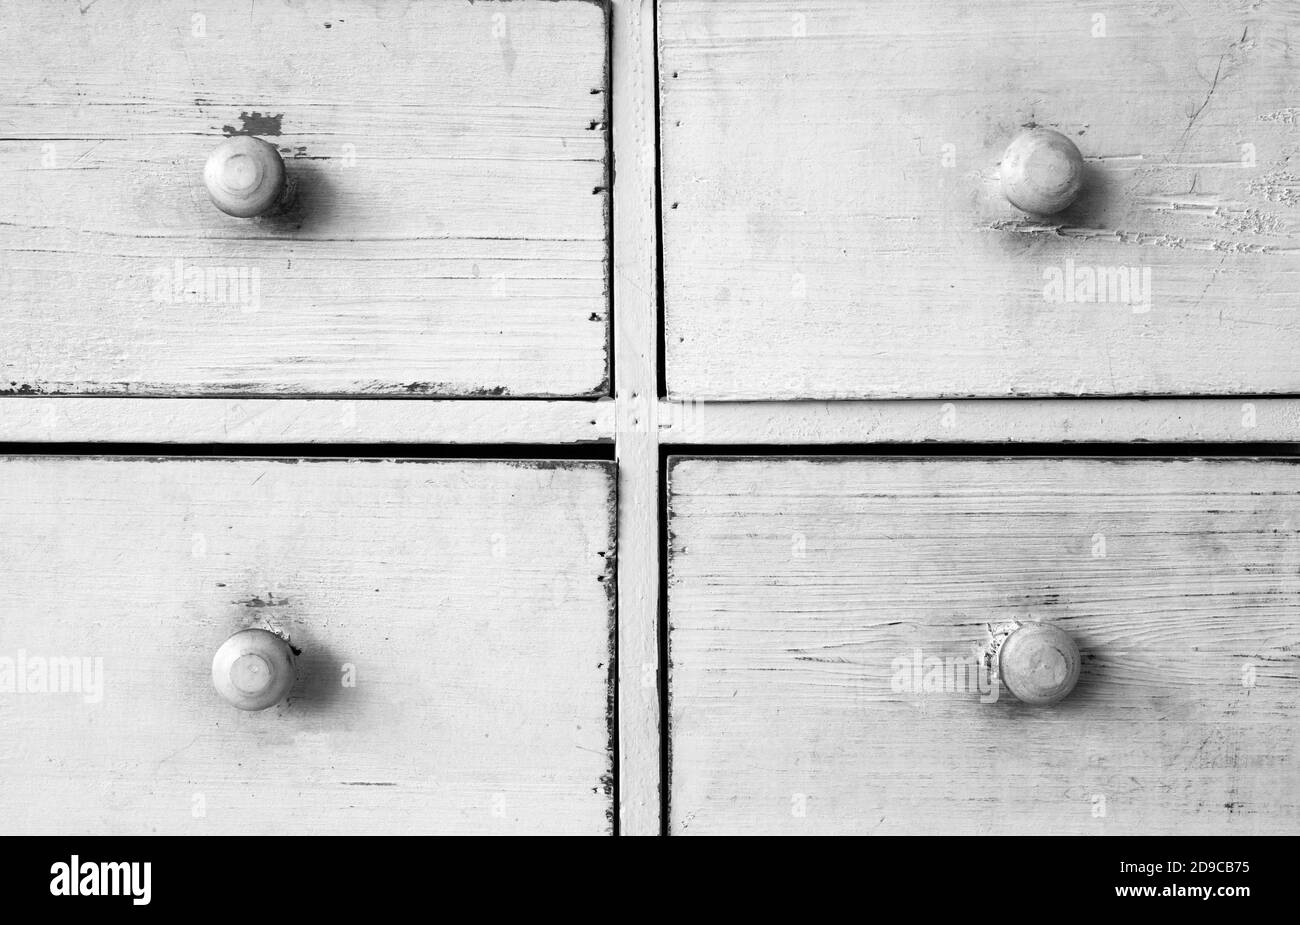 Furniture detail shot of vintage old white wooden chest of drawers background texture Stock Photo